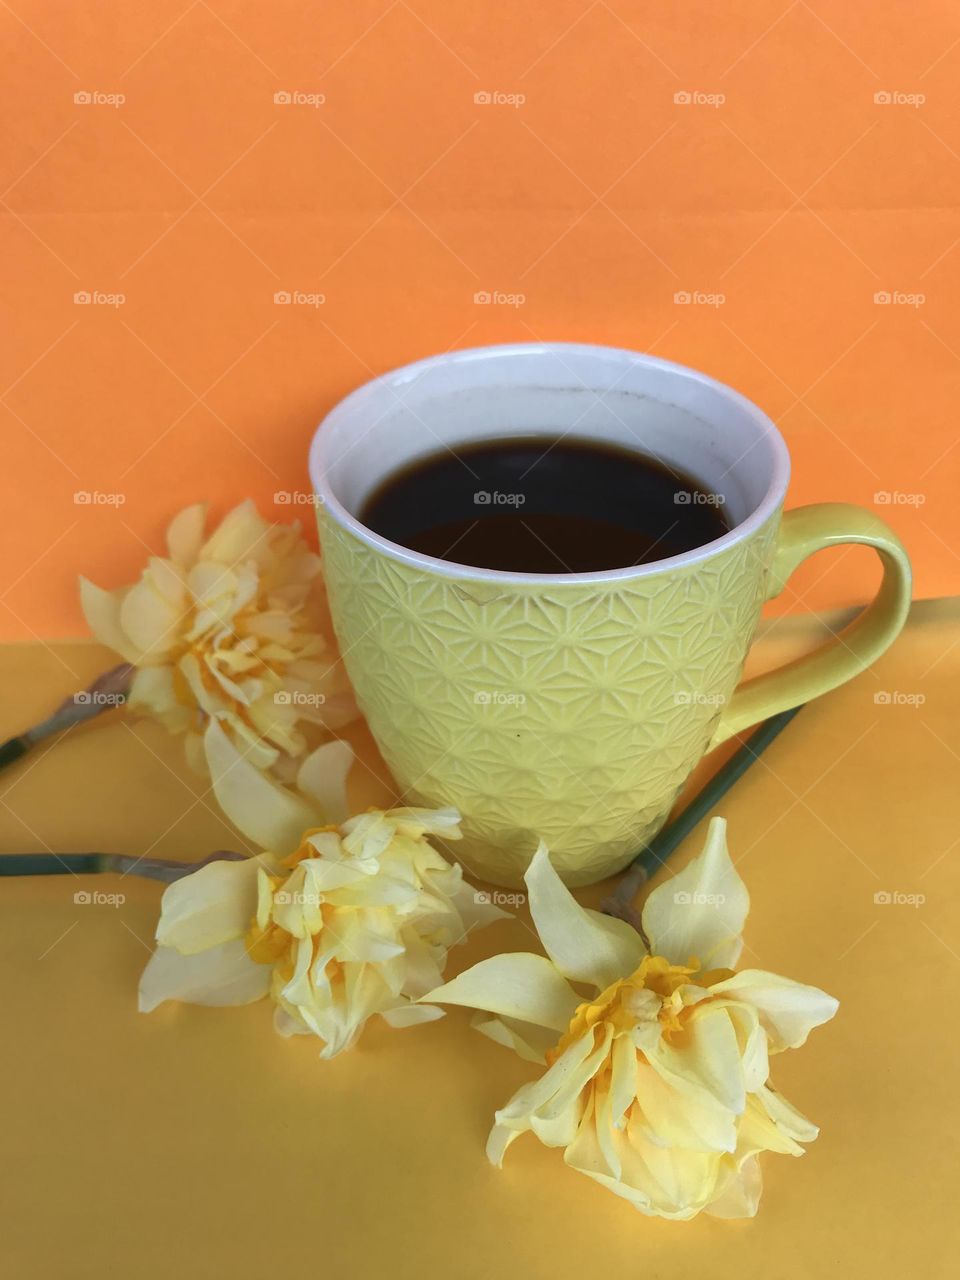 Yellow daffodils and a yellow cup of black coffee